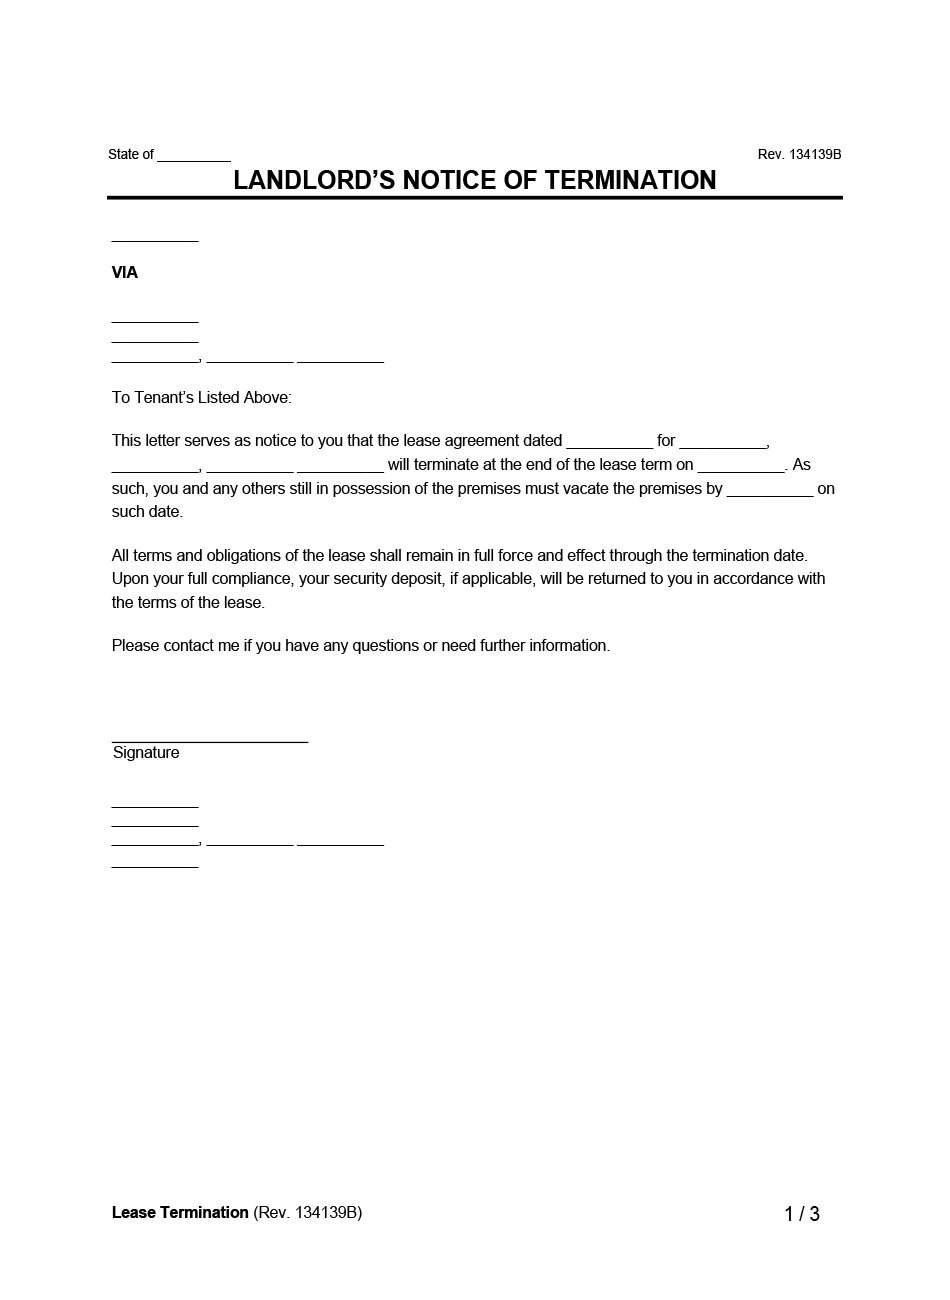 Lease Termination Example Form